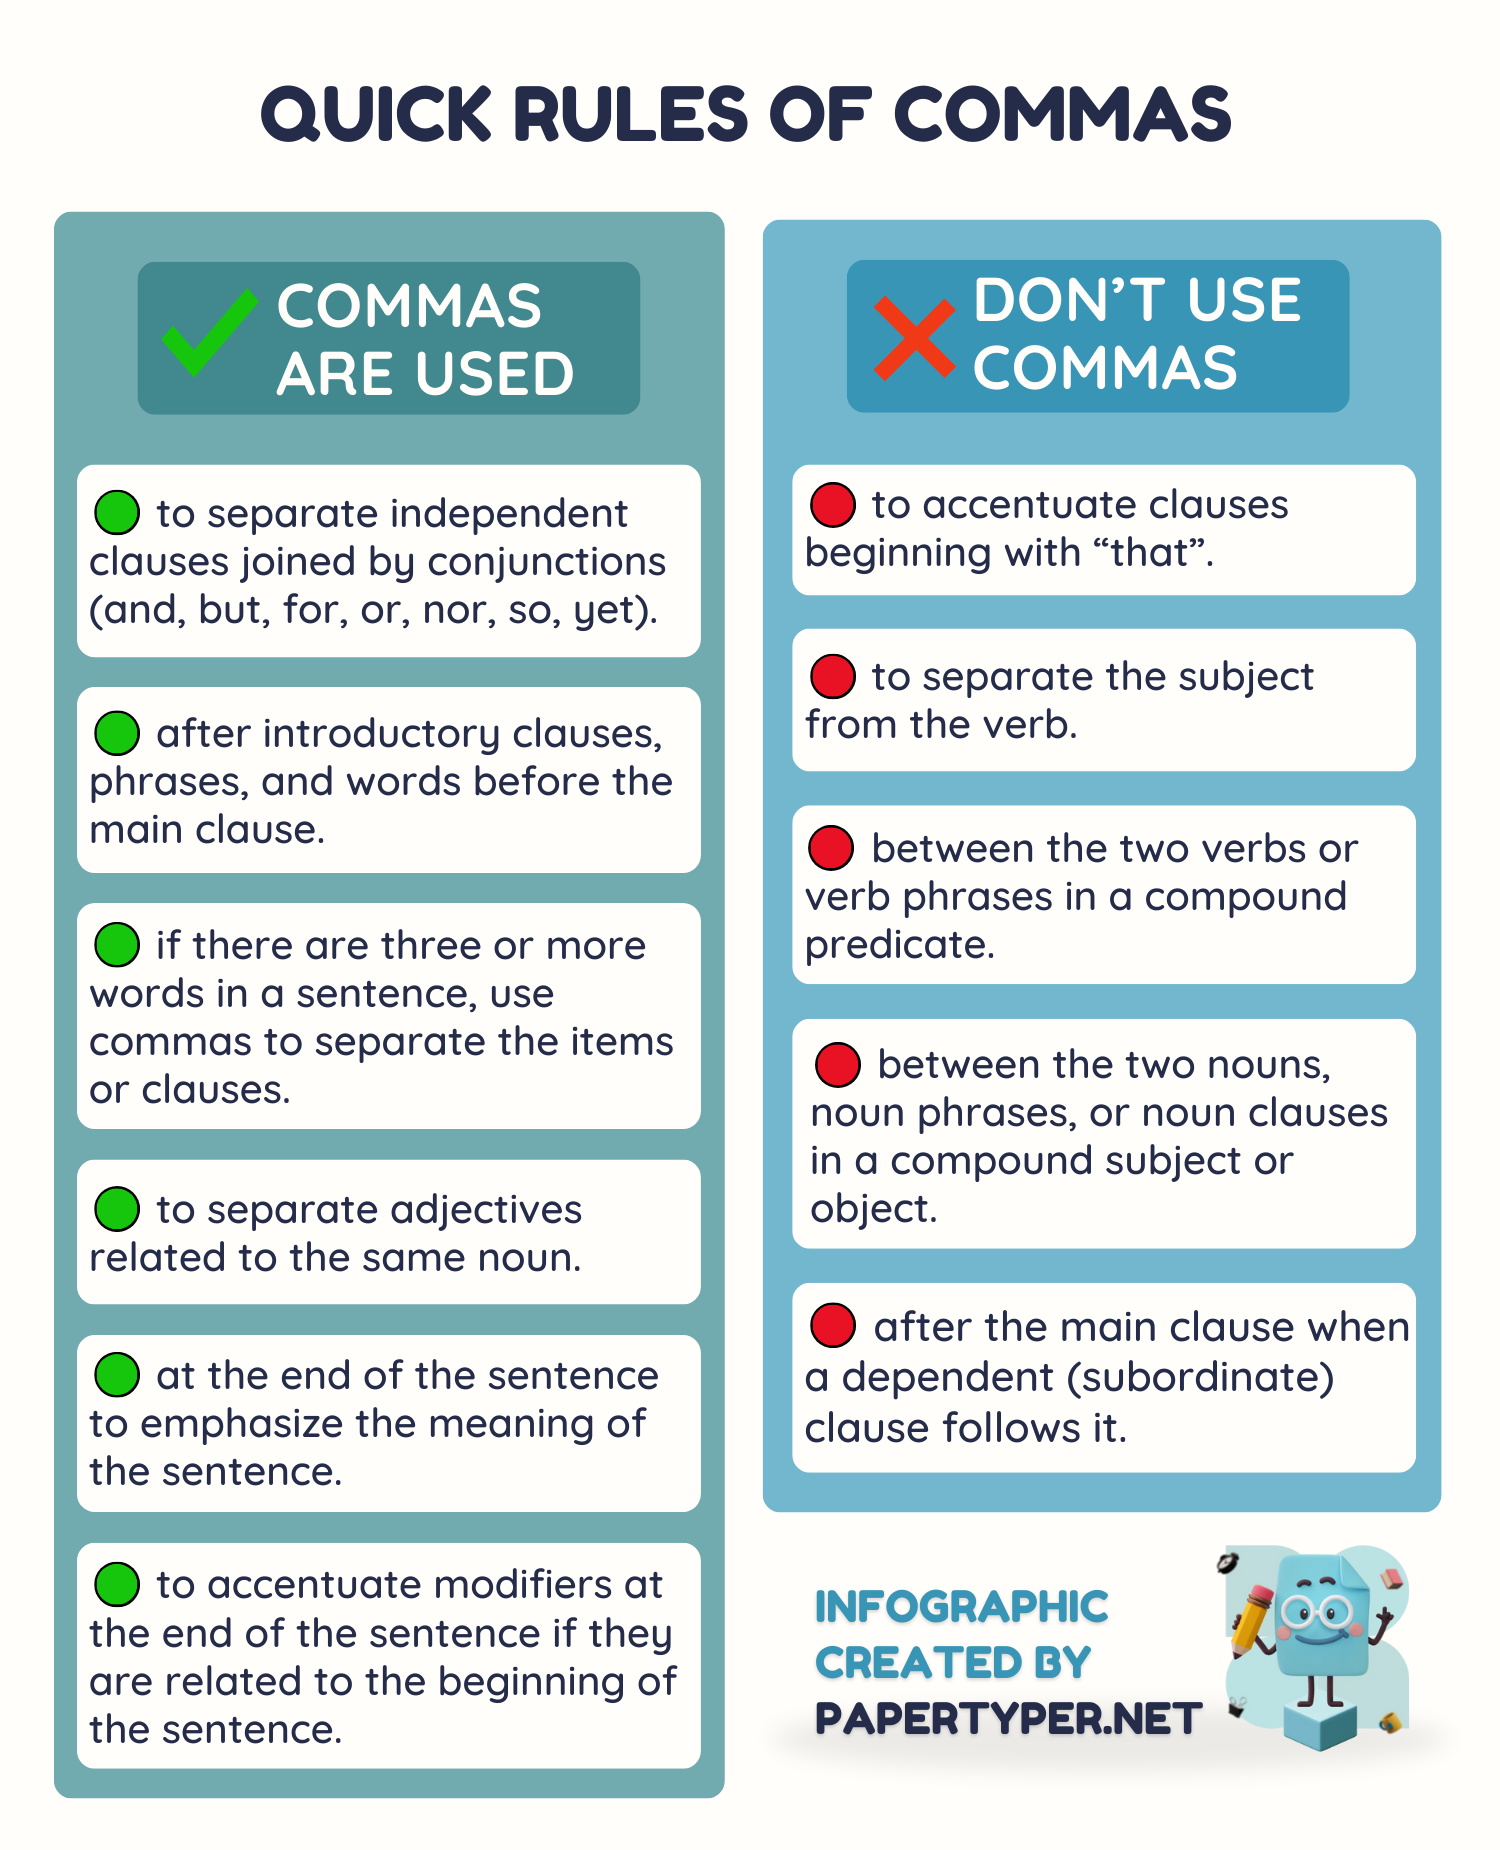 Comma rules infographic